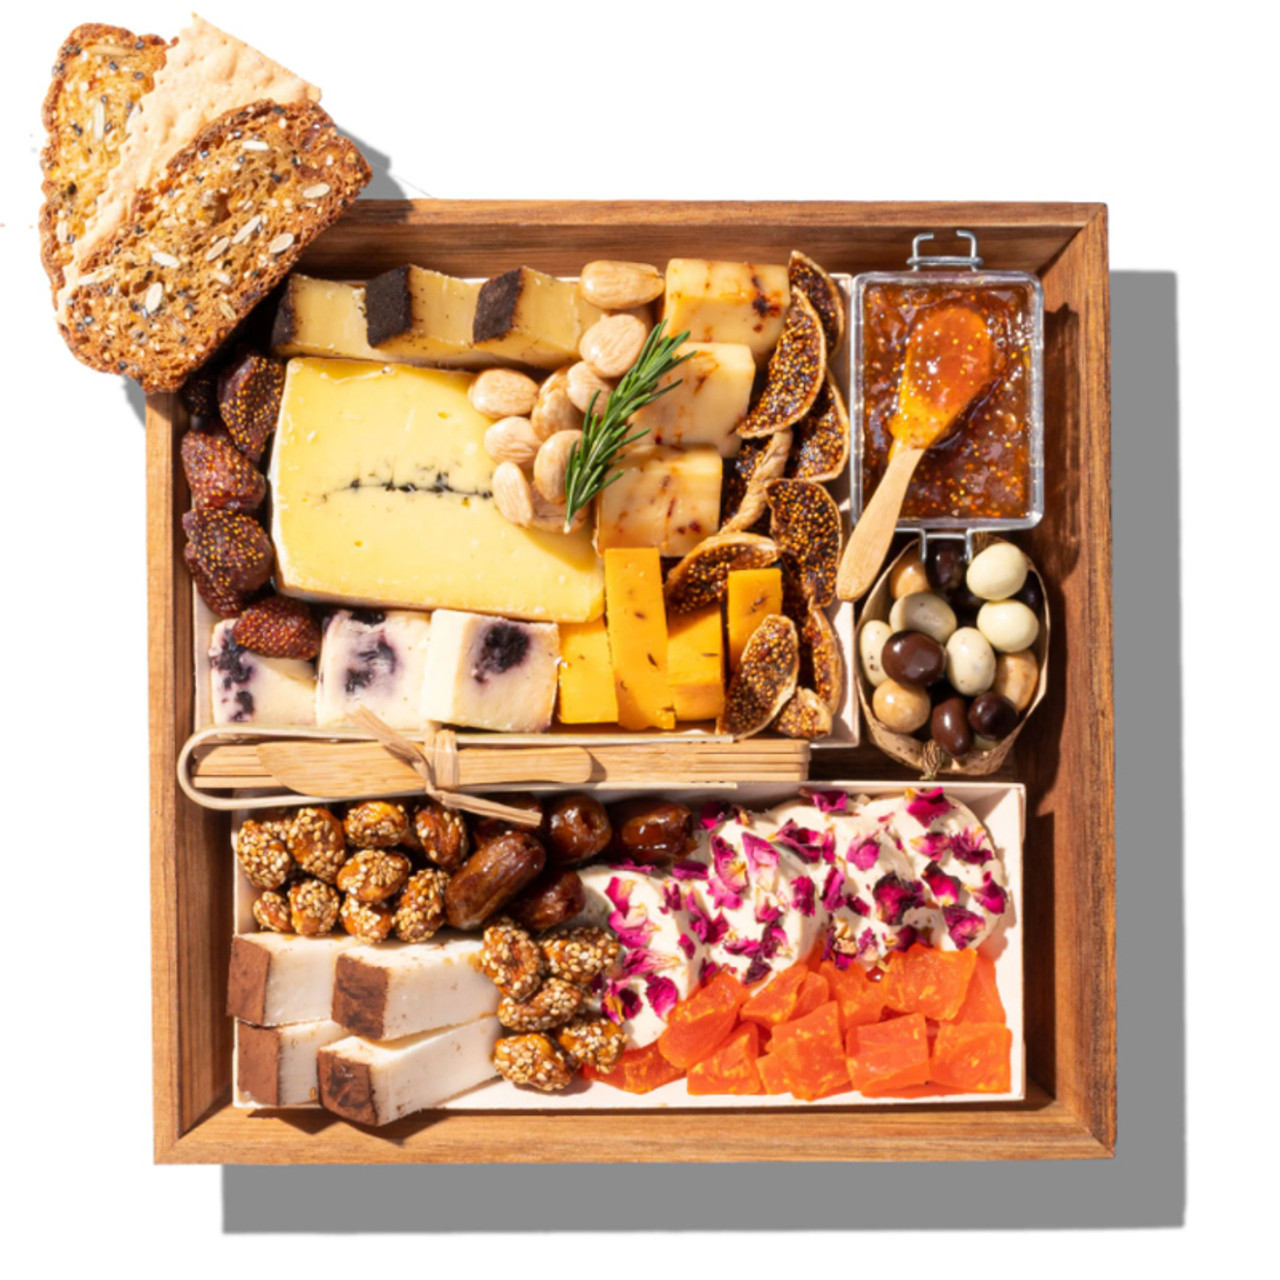 Ciccetti Cheeseboard, Gourmet Cheese Plate